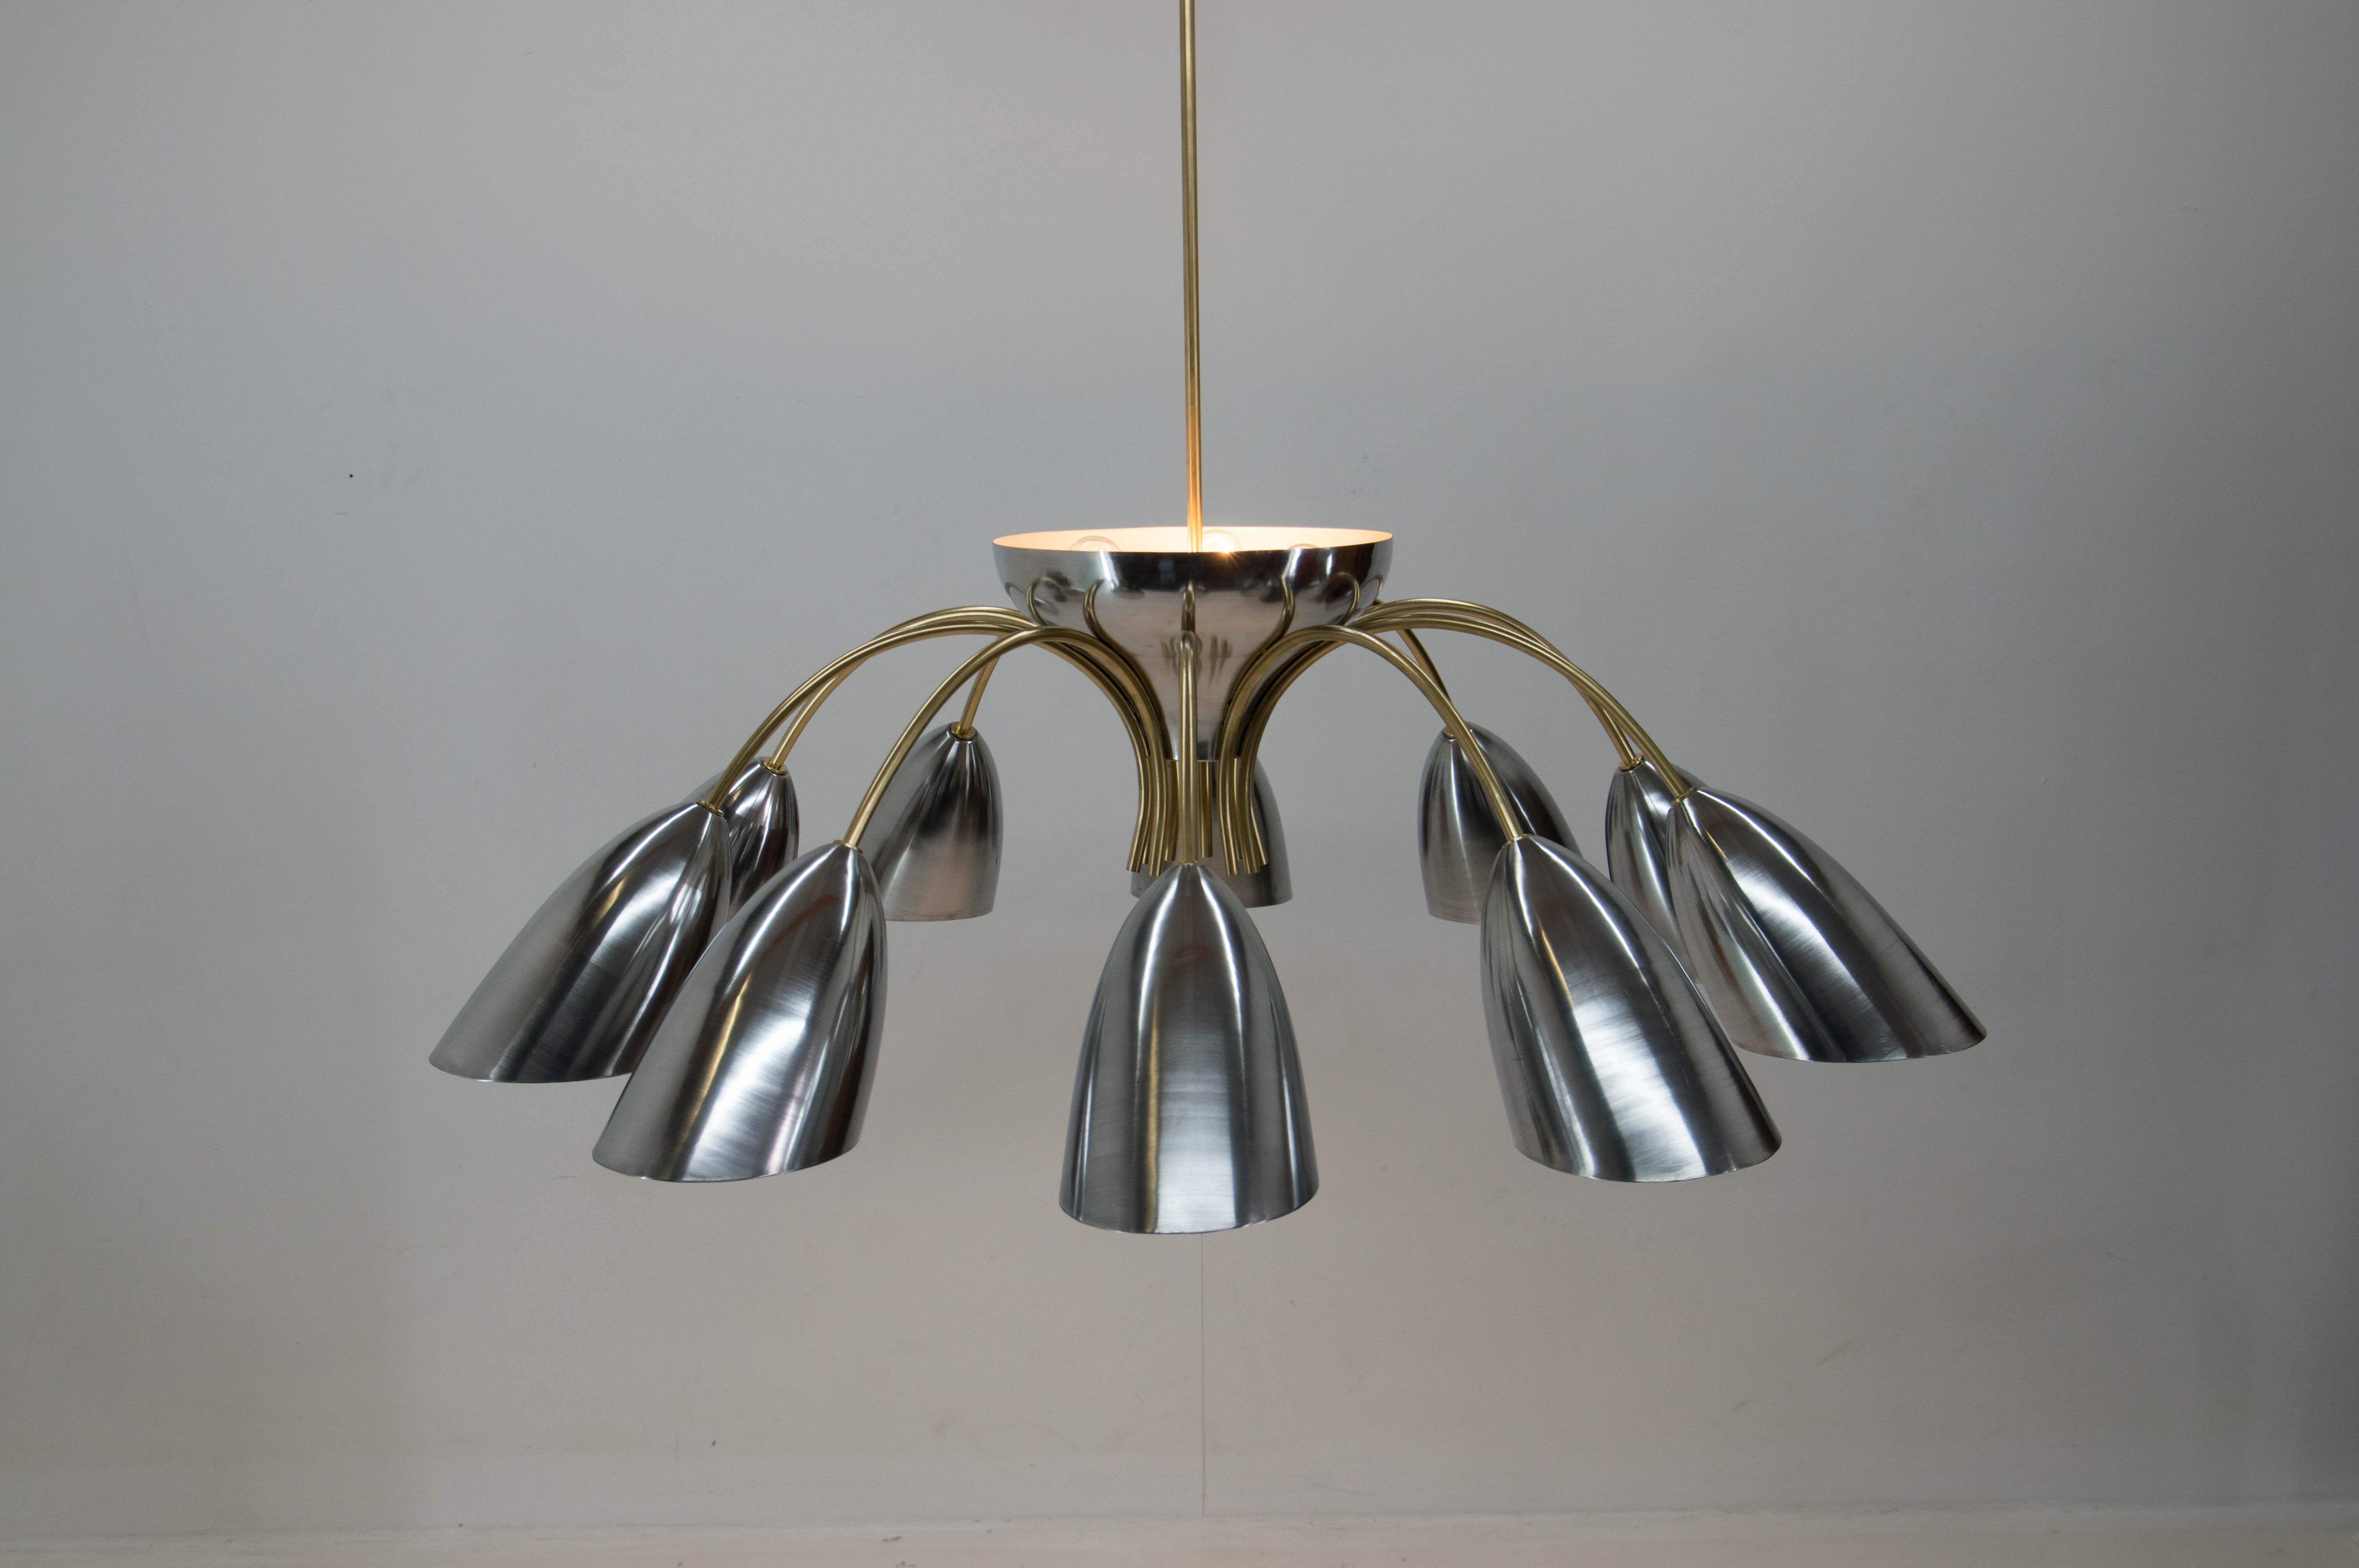 Extraordinary huge Space Age chandelier custom made in 1960s. Only few pieces were made for representative purposes in Czech factory. This piece was carefully disassembled, cleaned, the steel arms repainted to the original brass color, aluminum